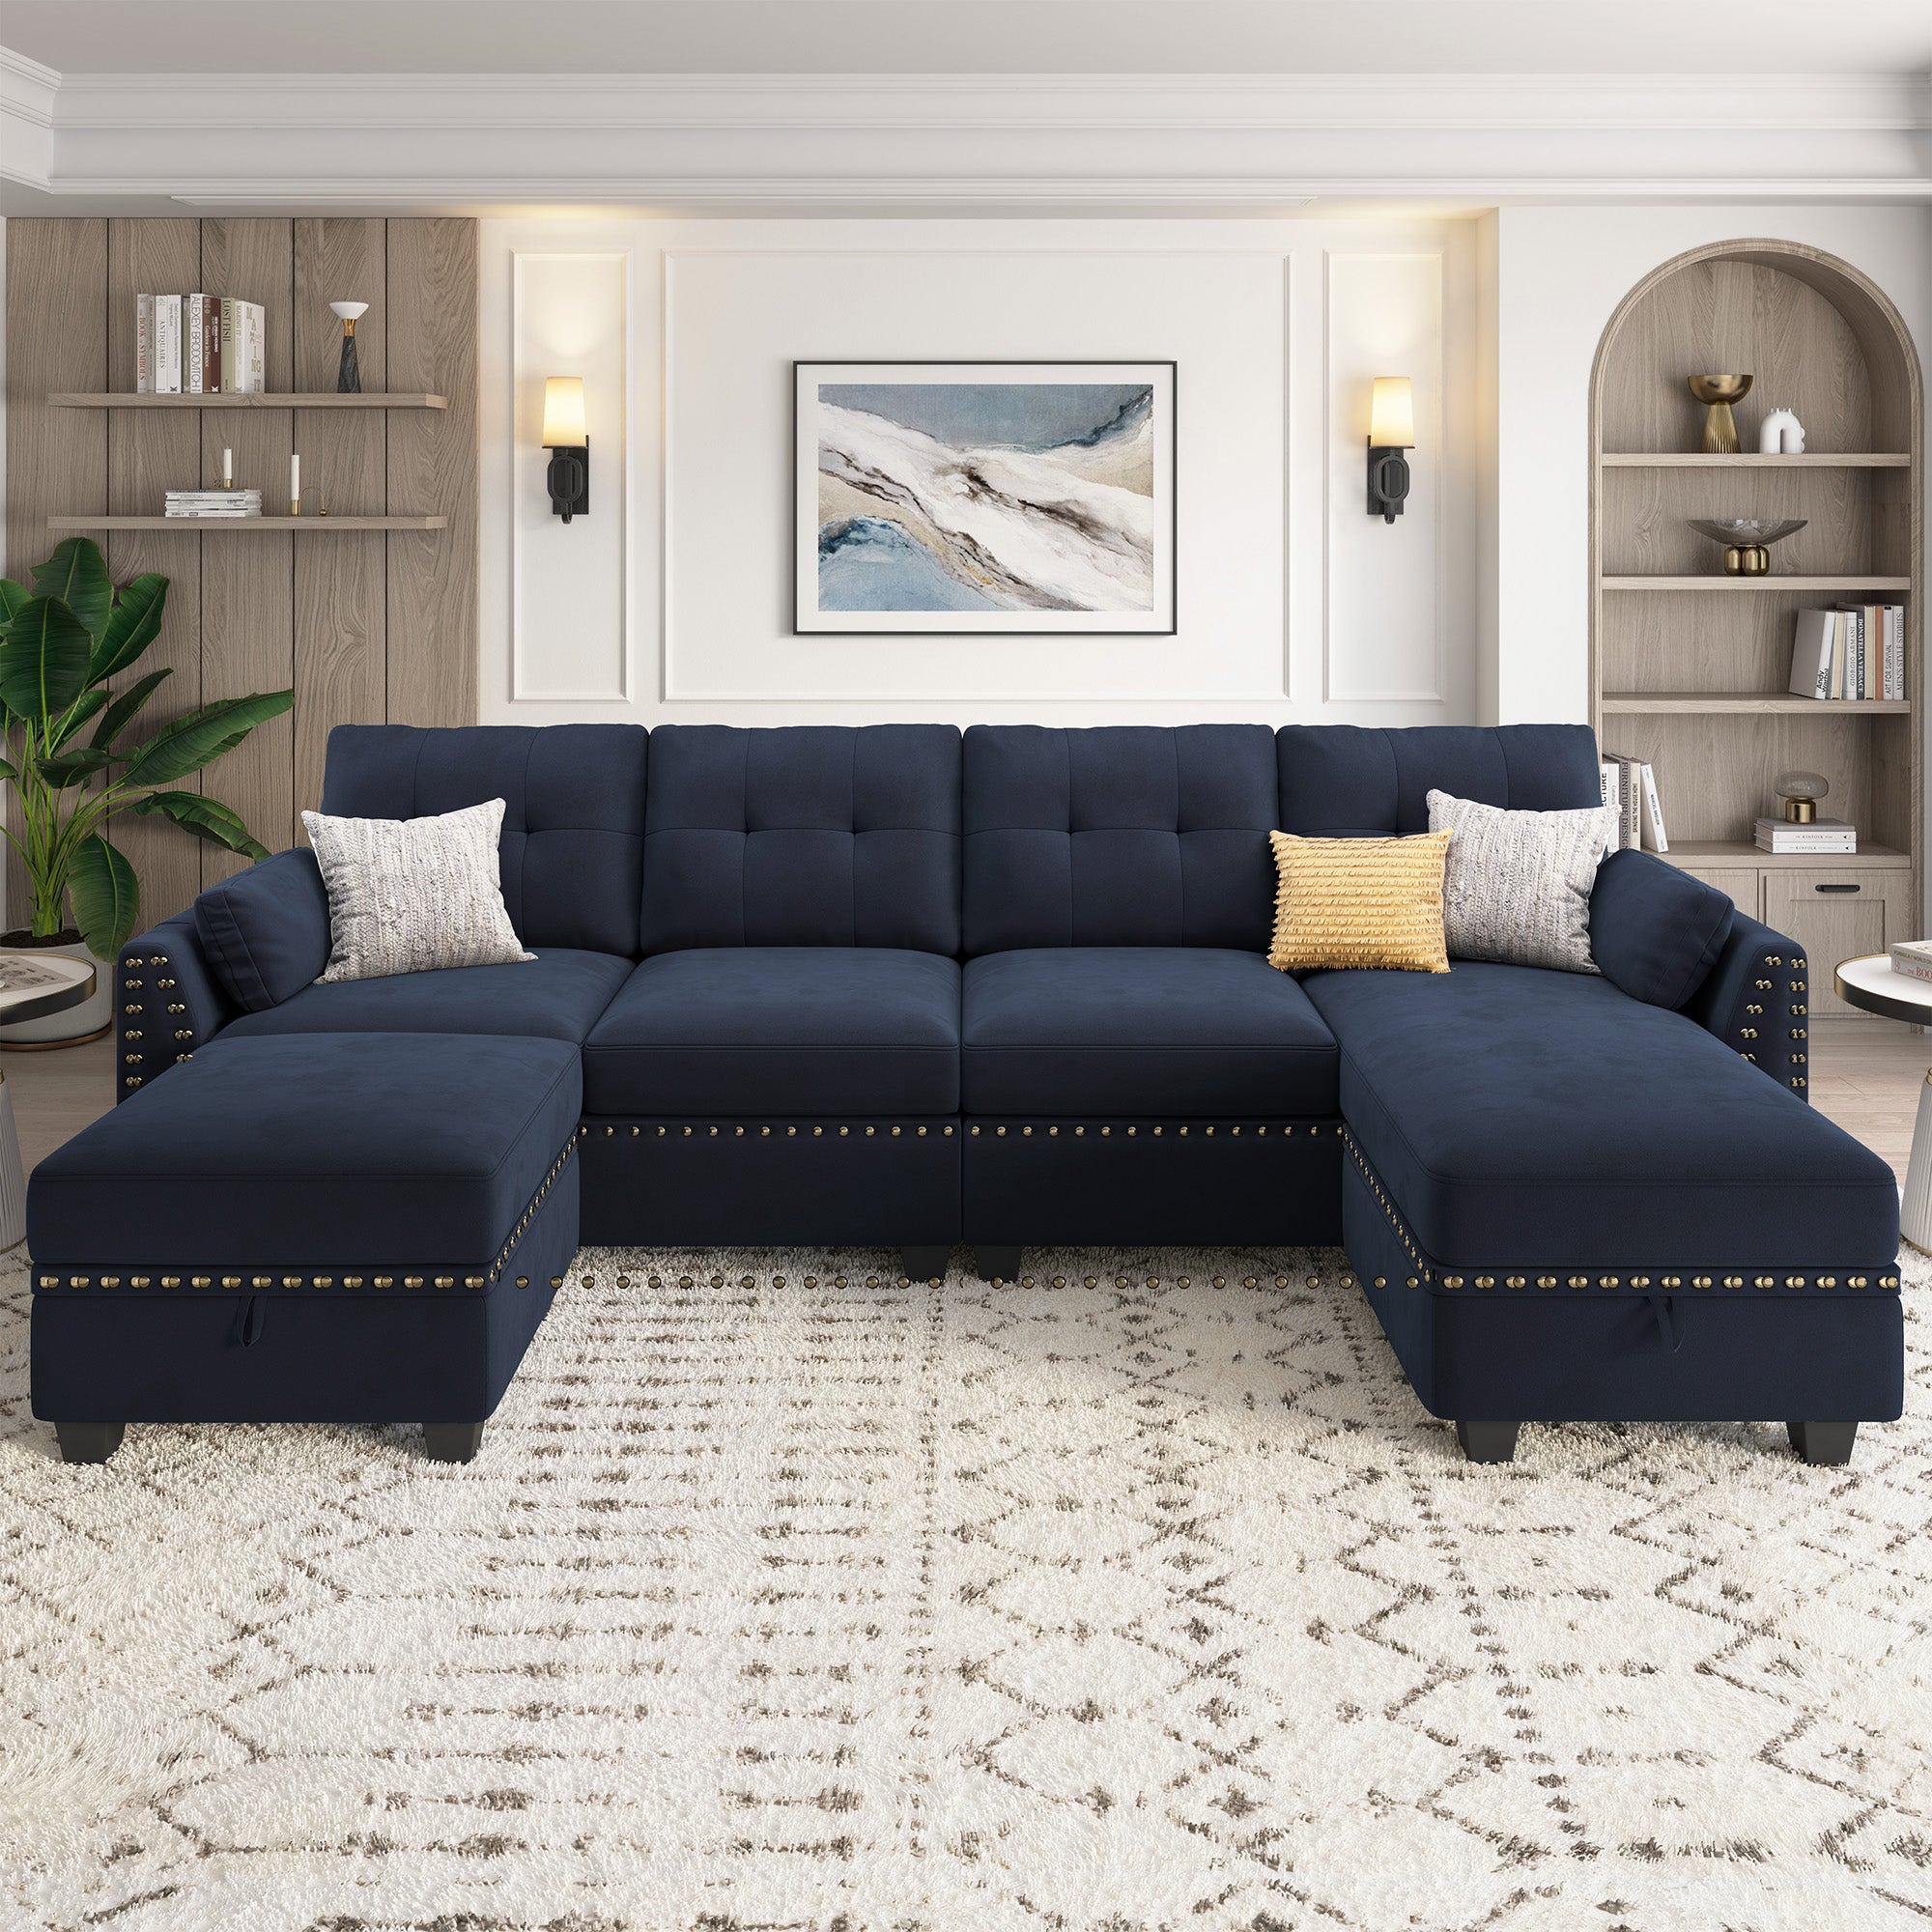 HONBAY 5-Piece Velvet Convertible Sectional With Storage Ottoman